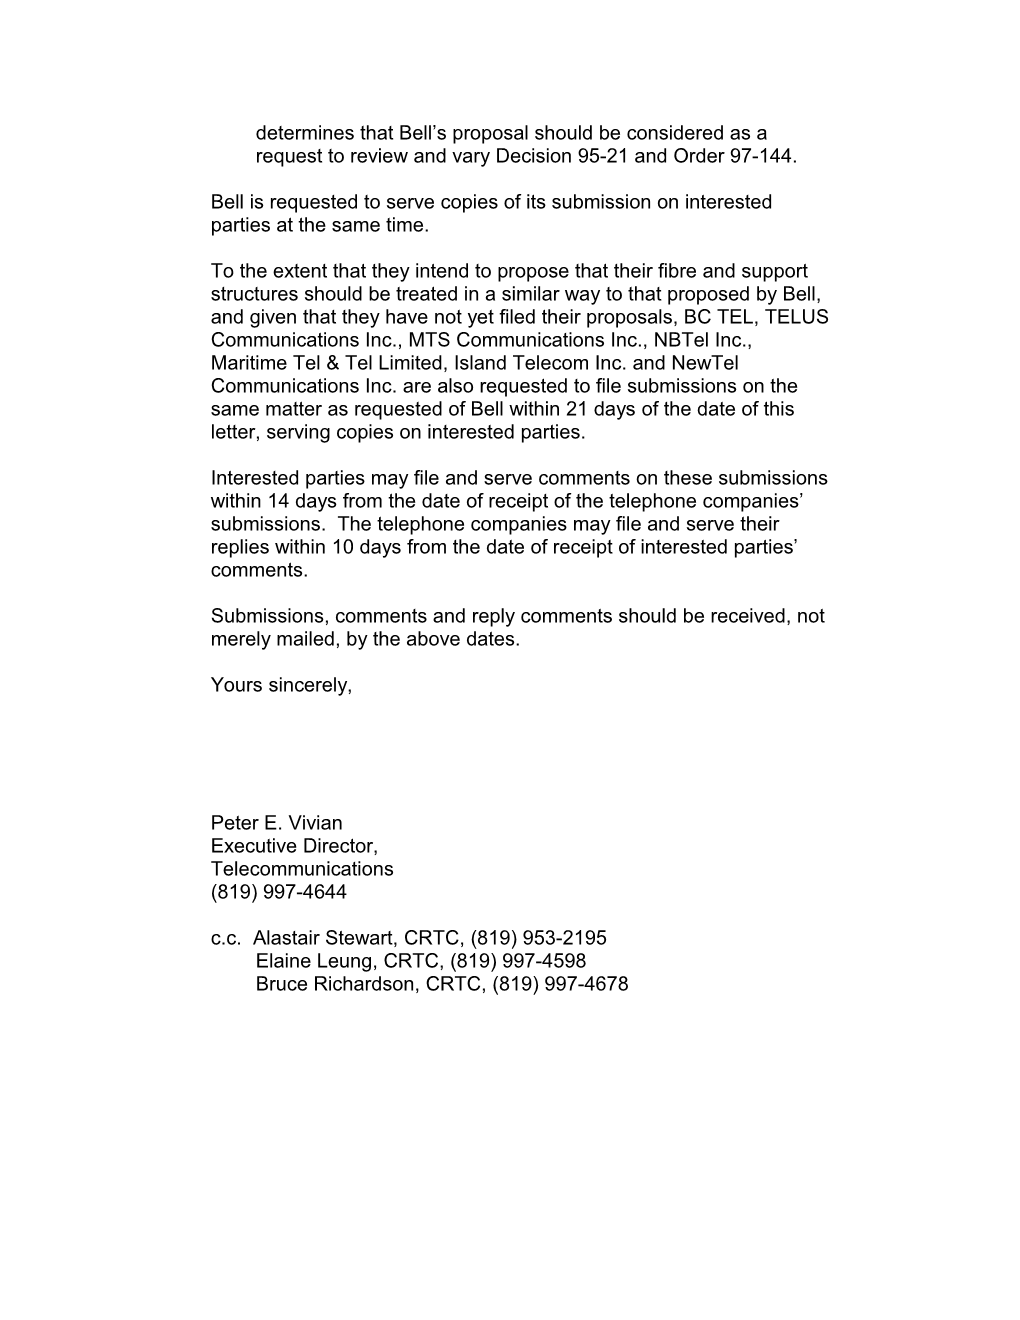 Subject: Bell Canada S Proposed Revisions to Its 1998